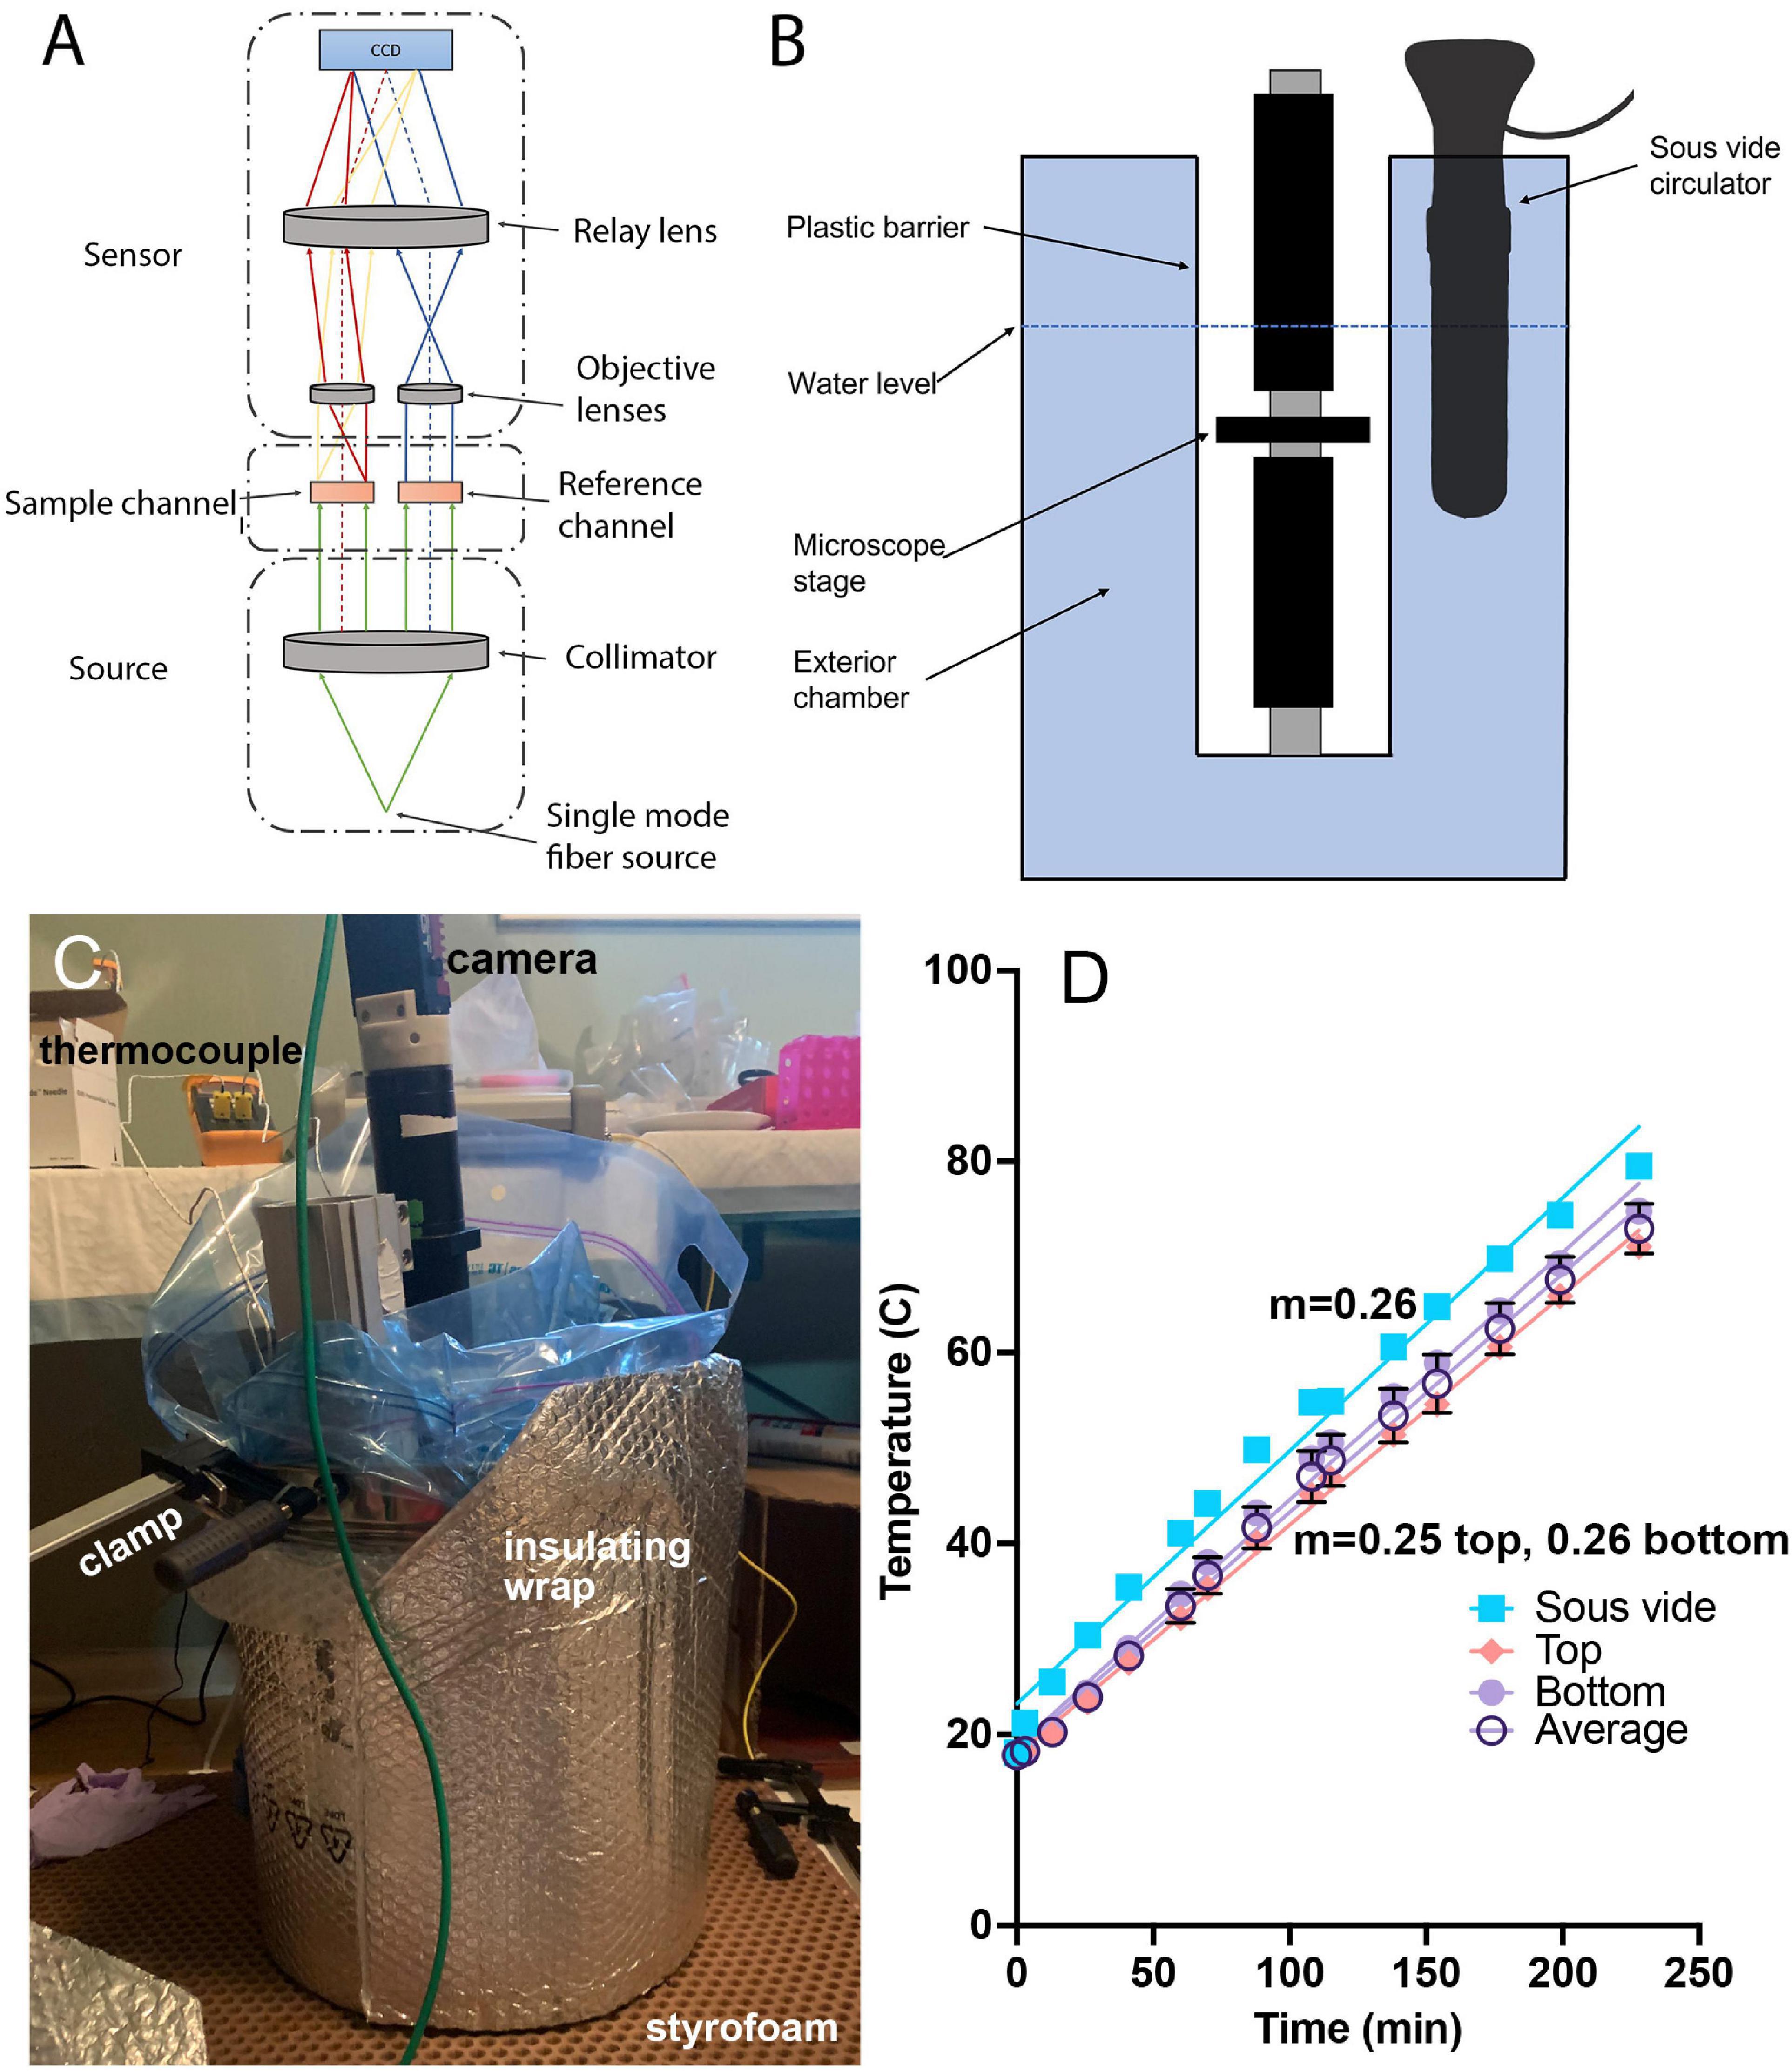 Frontiers  Quantification of Motility in Bacillus subtilis at Temperatures  Up to 84°C Using a Submersible Volumetric Microscope and Automated Tracking